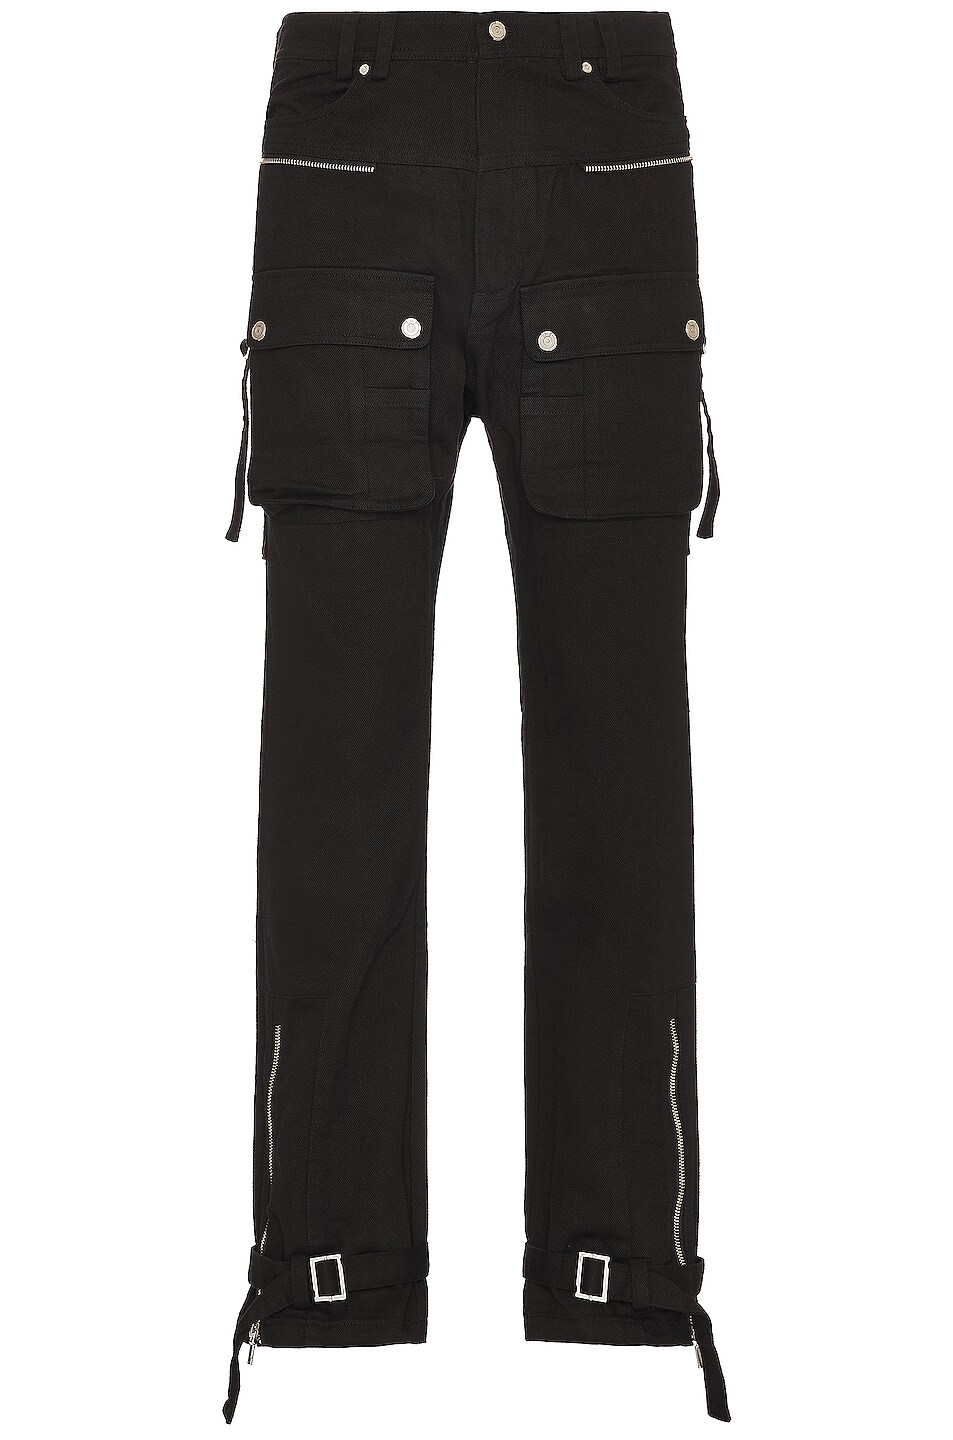 Image 1 of C2H4 Tulwar Cut Military Work Straight Pant in Faded Black